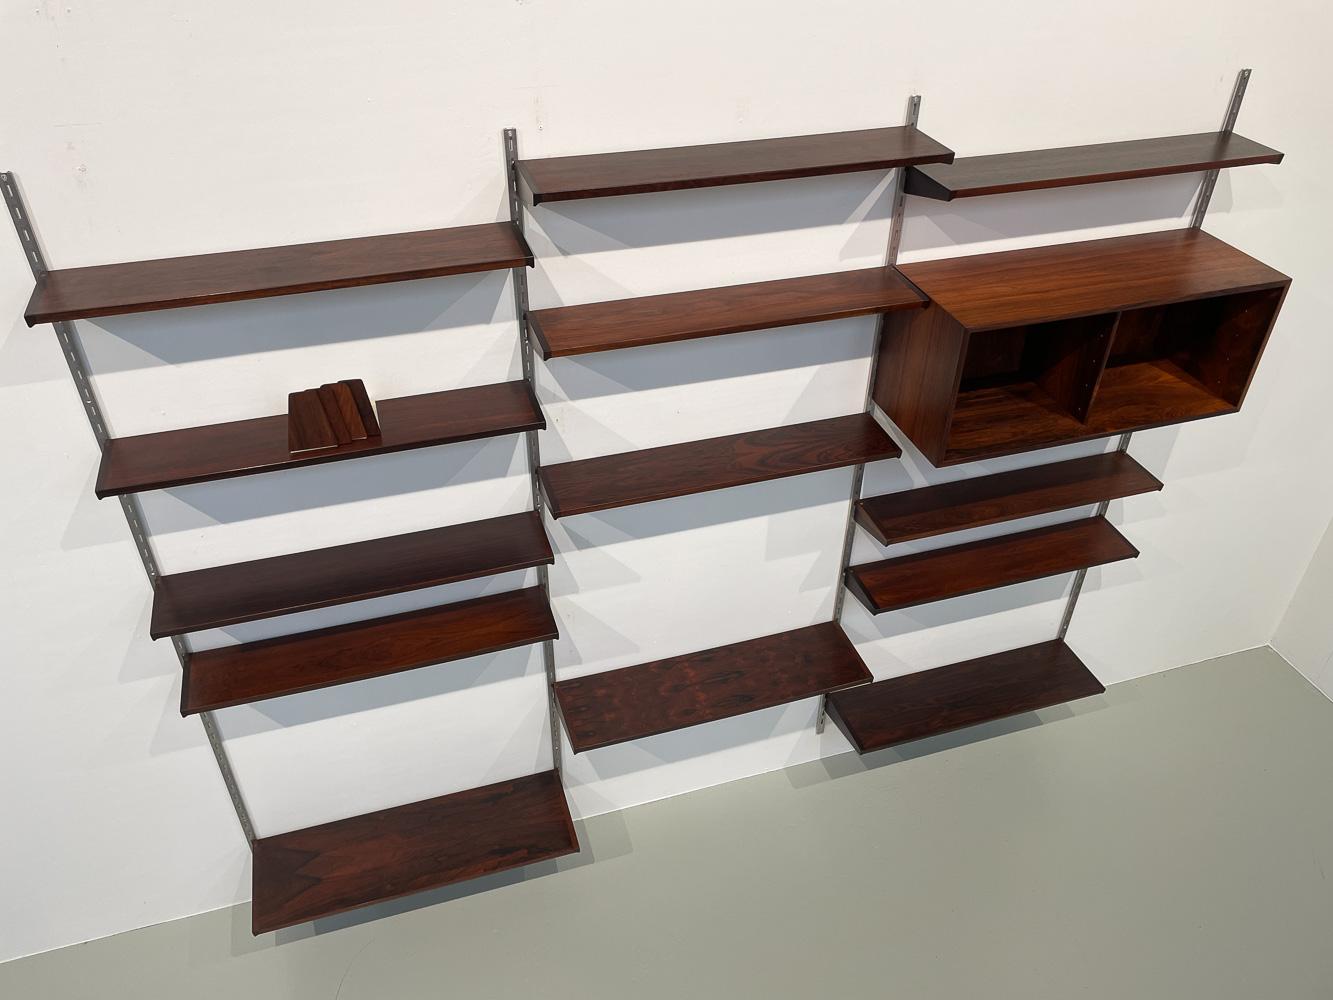 Vintage Danish Rosewood 3-Bay Wall Unit by Kai Kristiansen for FM, 1960s For Sale 7